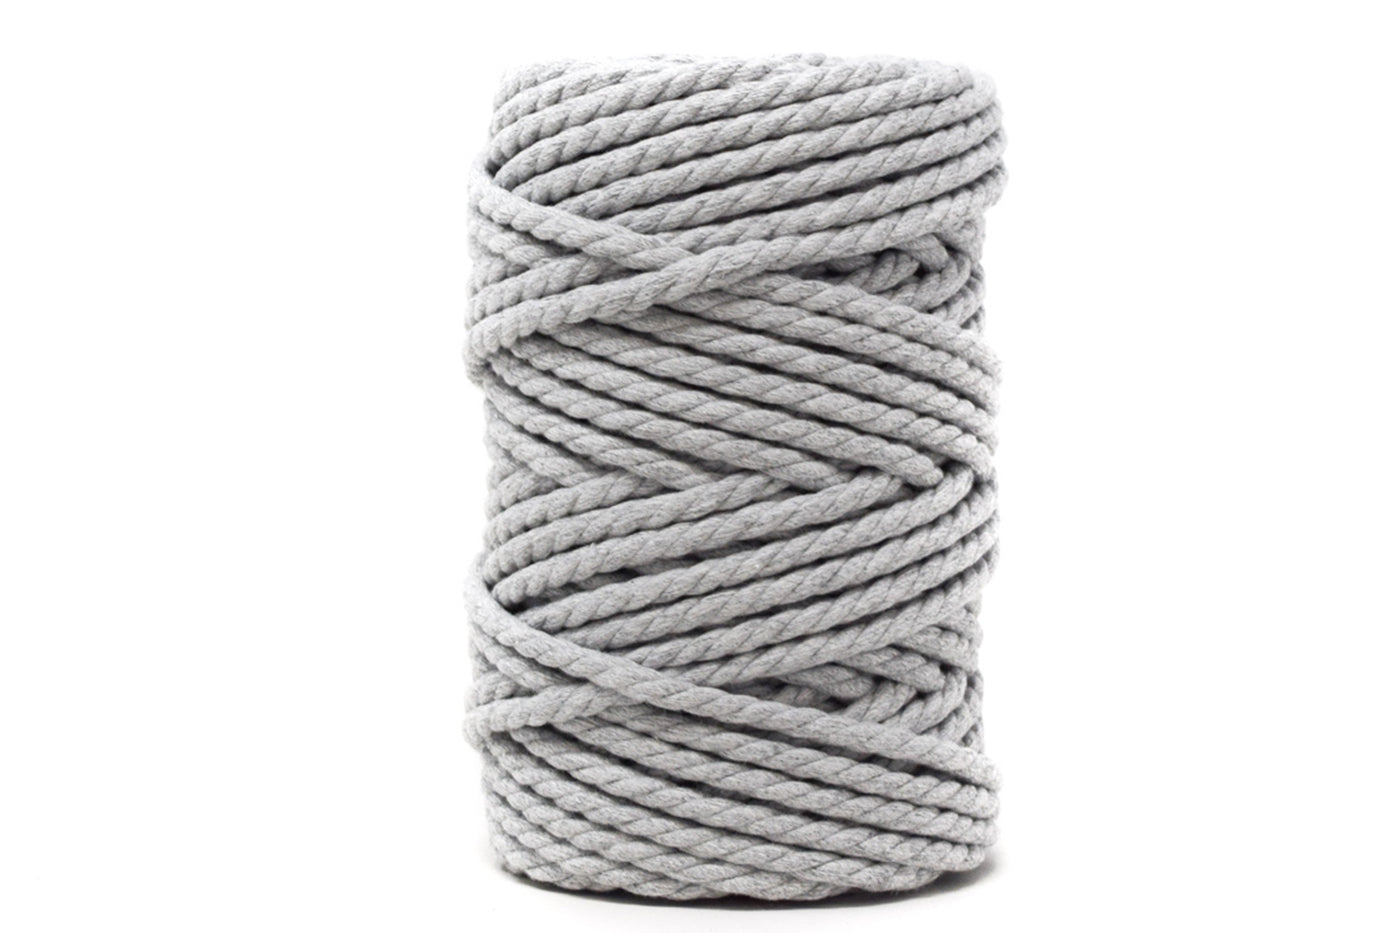 COTTON ROPE ZERO WASTE 5 MM - 3 PLY - LIGHT HEATHER GRAY COLOR